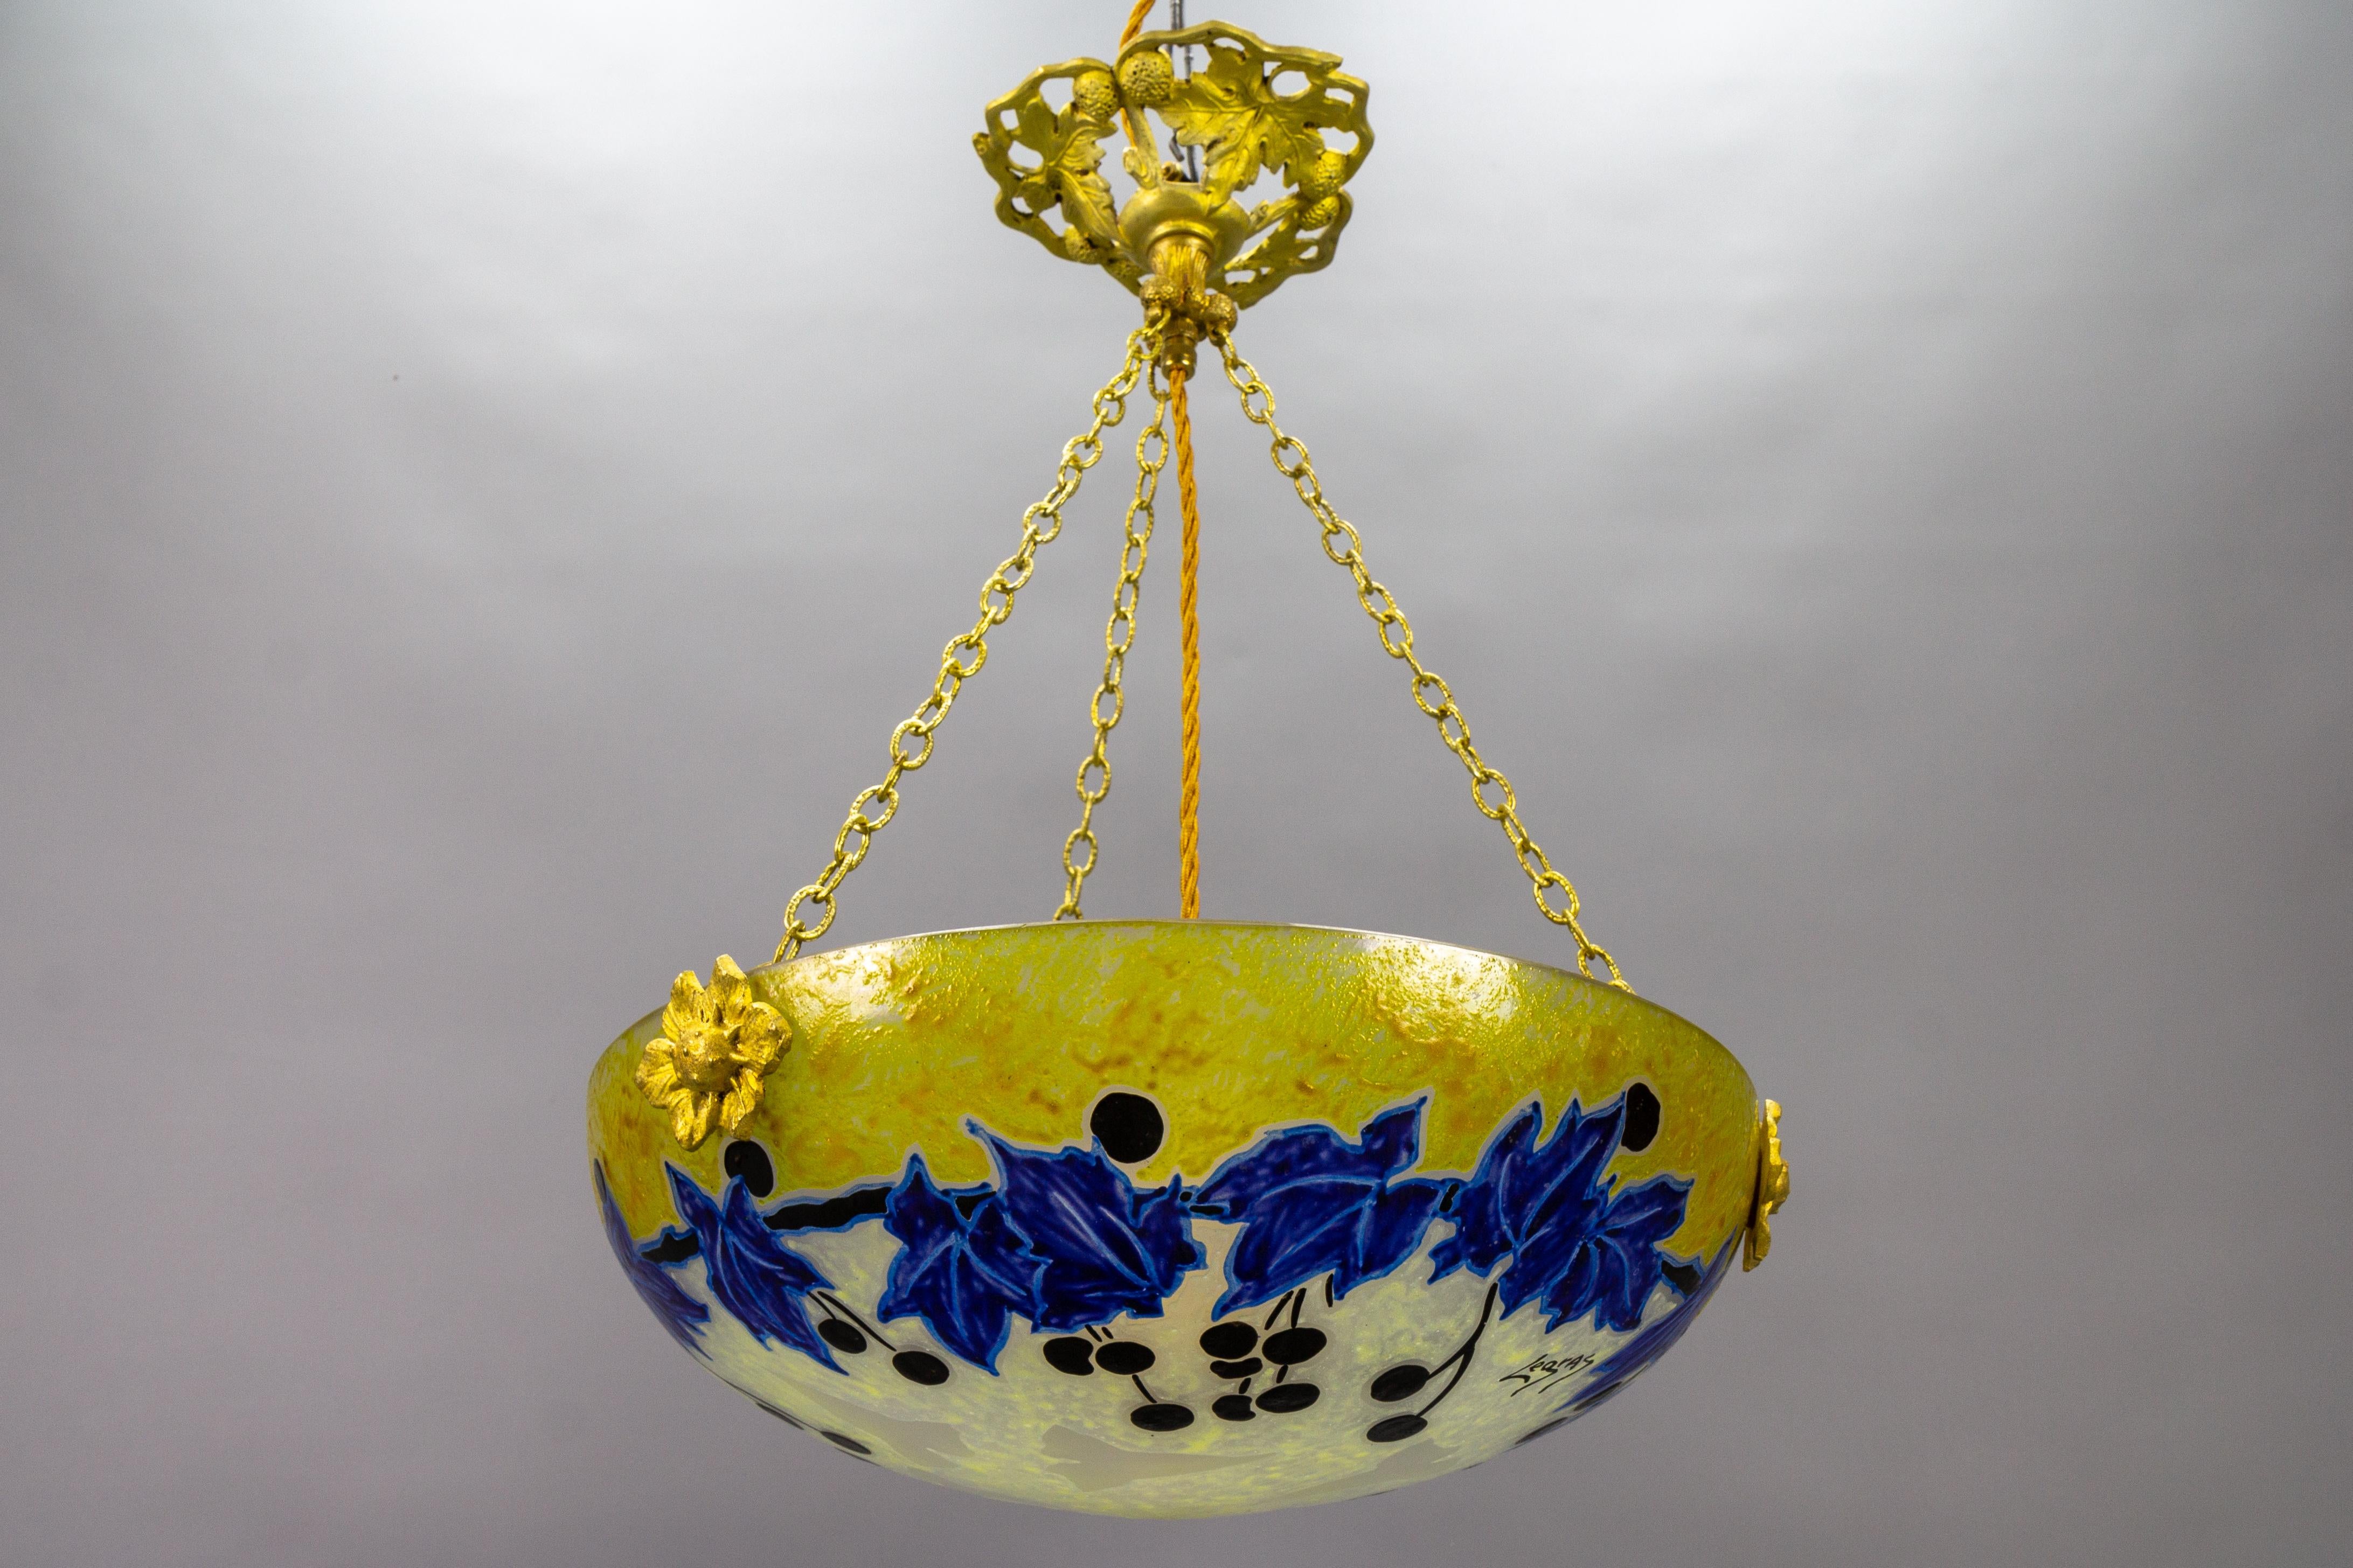 French Art Nouveau Pendant Light with Yellow and Blue Glass Ivy Motifs by Legras For Sale 14